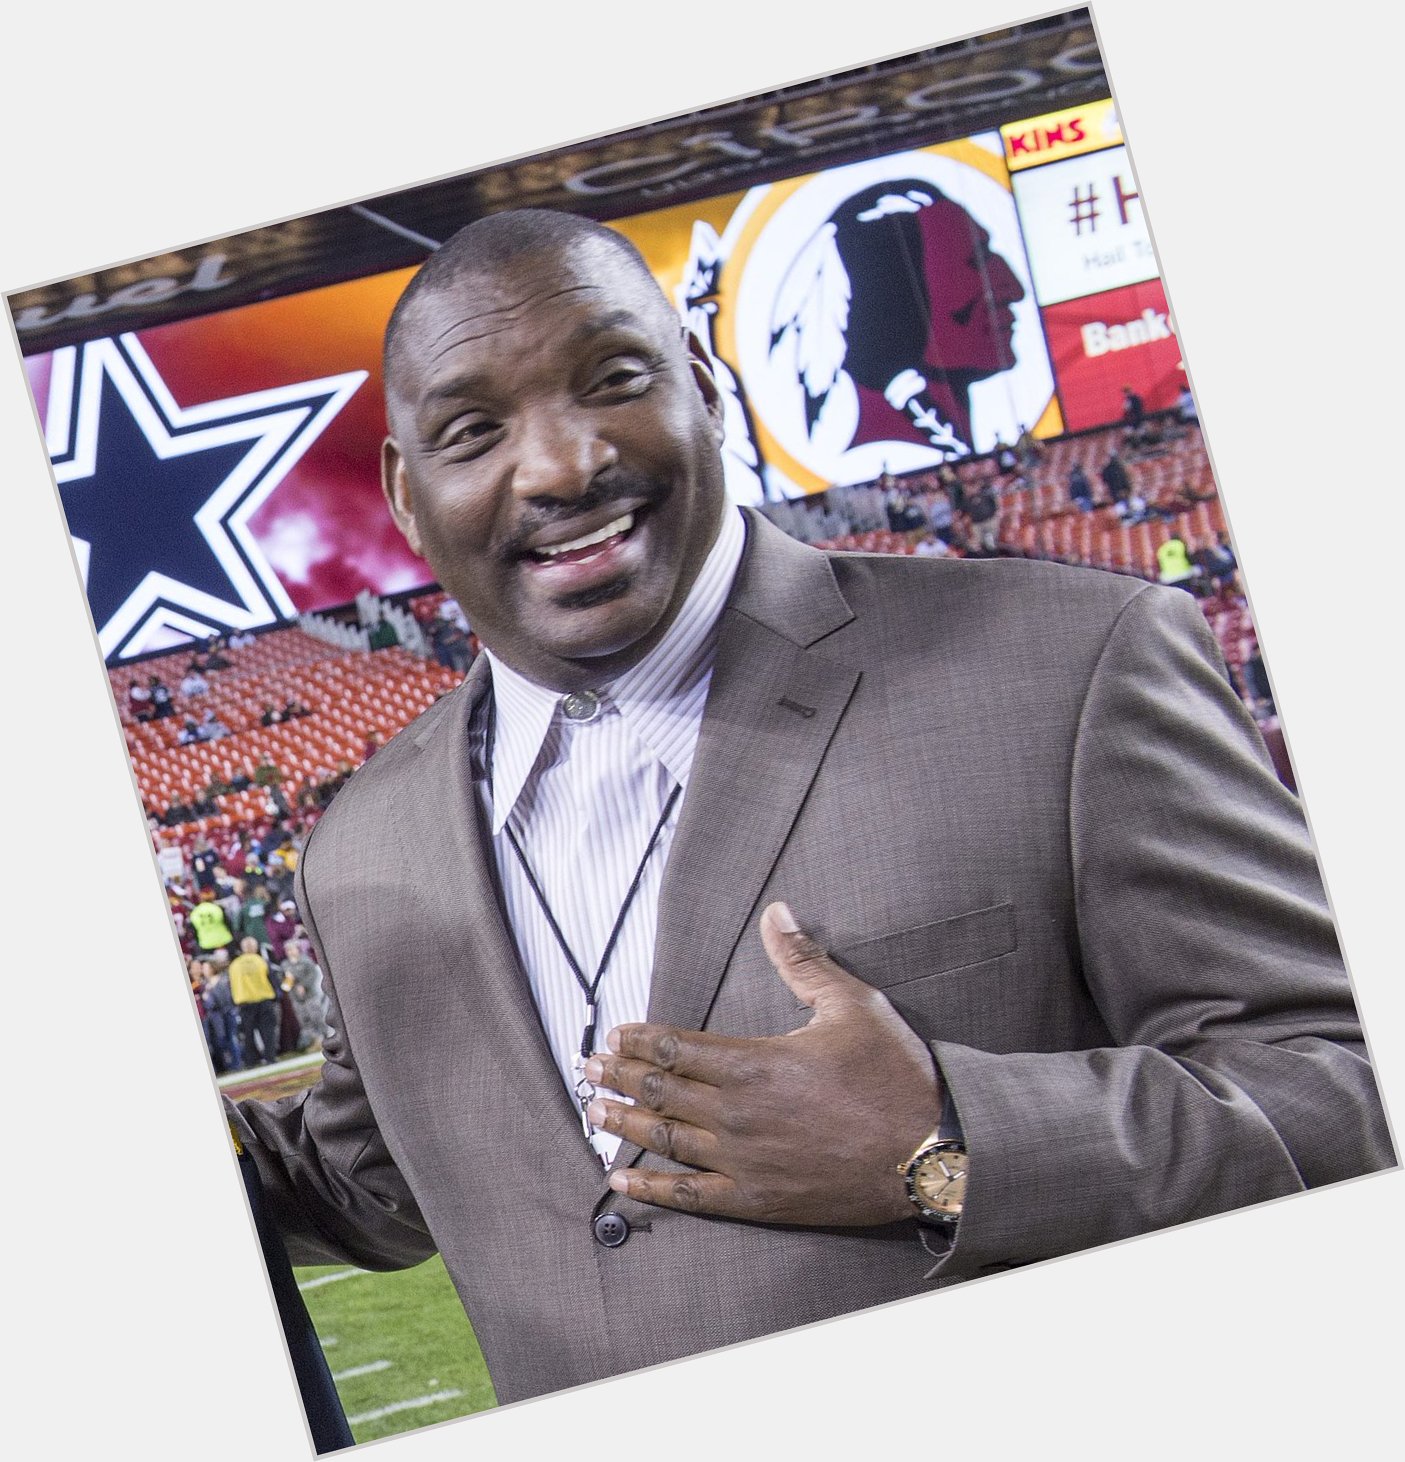 Happy birthday to the great legend Doug Williams...and to me because we share the same birthday 